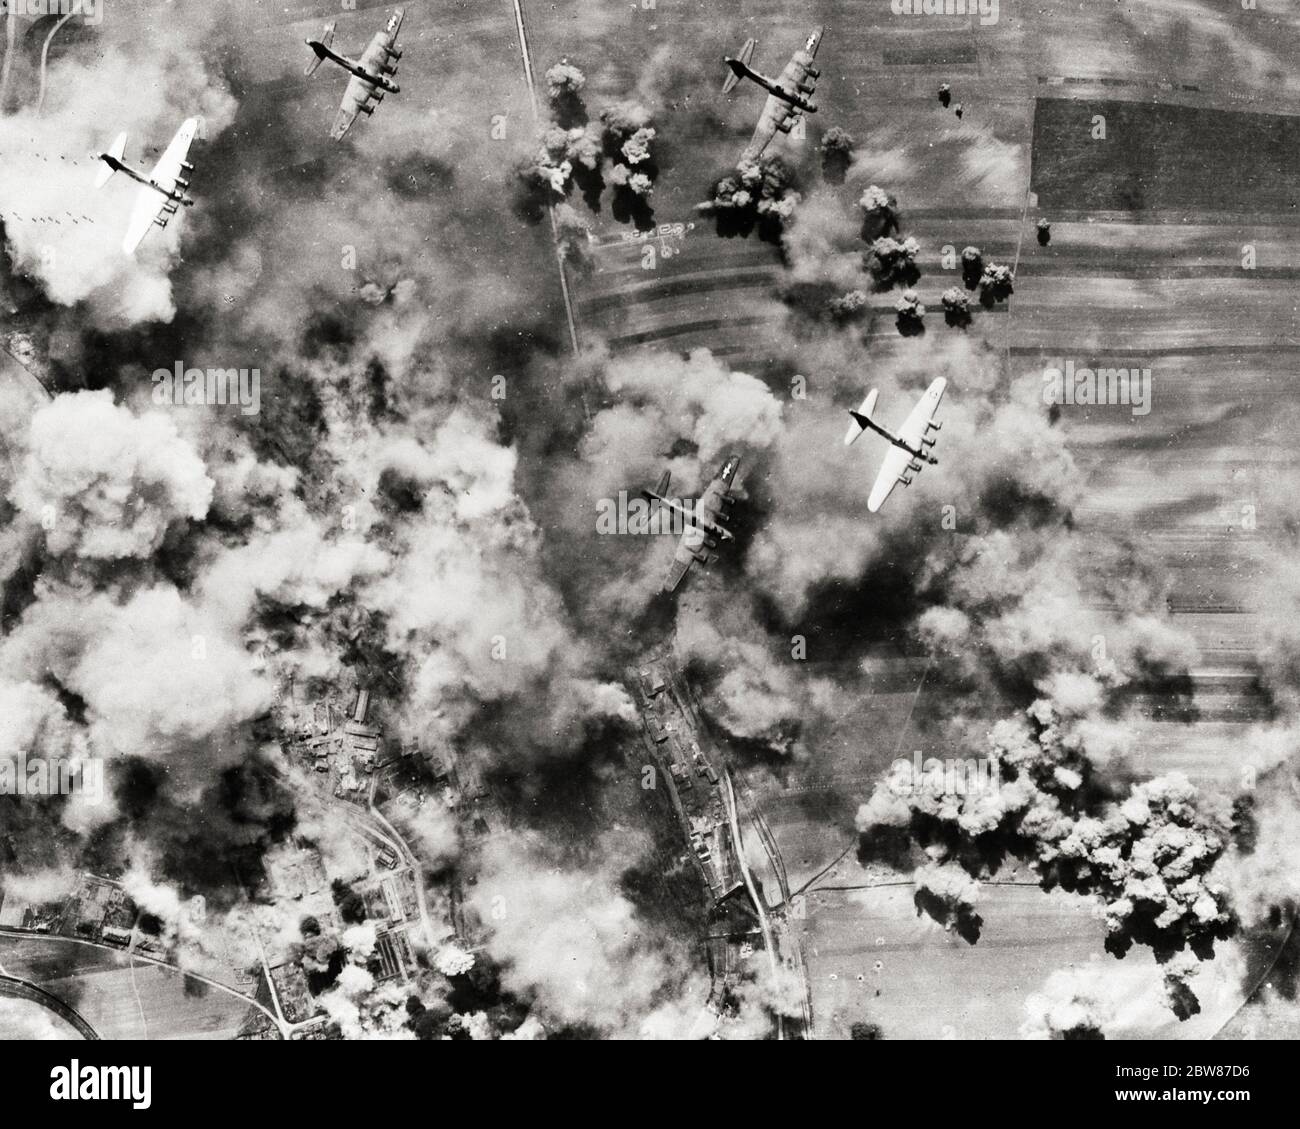 1940S FLIGHT OF B-17 US ARMY AIR CORPS 15TH AIR FORCE BOMBERS BOMBING MESSERSCHMITT AIRCRAFT FACTORY NEAR VIENNA AUSTRIA - asp ap6507 ASP001 HARS WORLD WAR 2 B-17 BOMBERS PRECISION VIENNA AERIAL VIEW AIR CORPS BLACK AND WHITE OLD FASHIONED UNITED STATES ARMY AIR FORCE Stock Photo